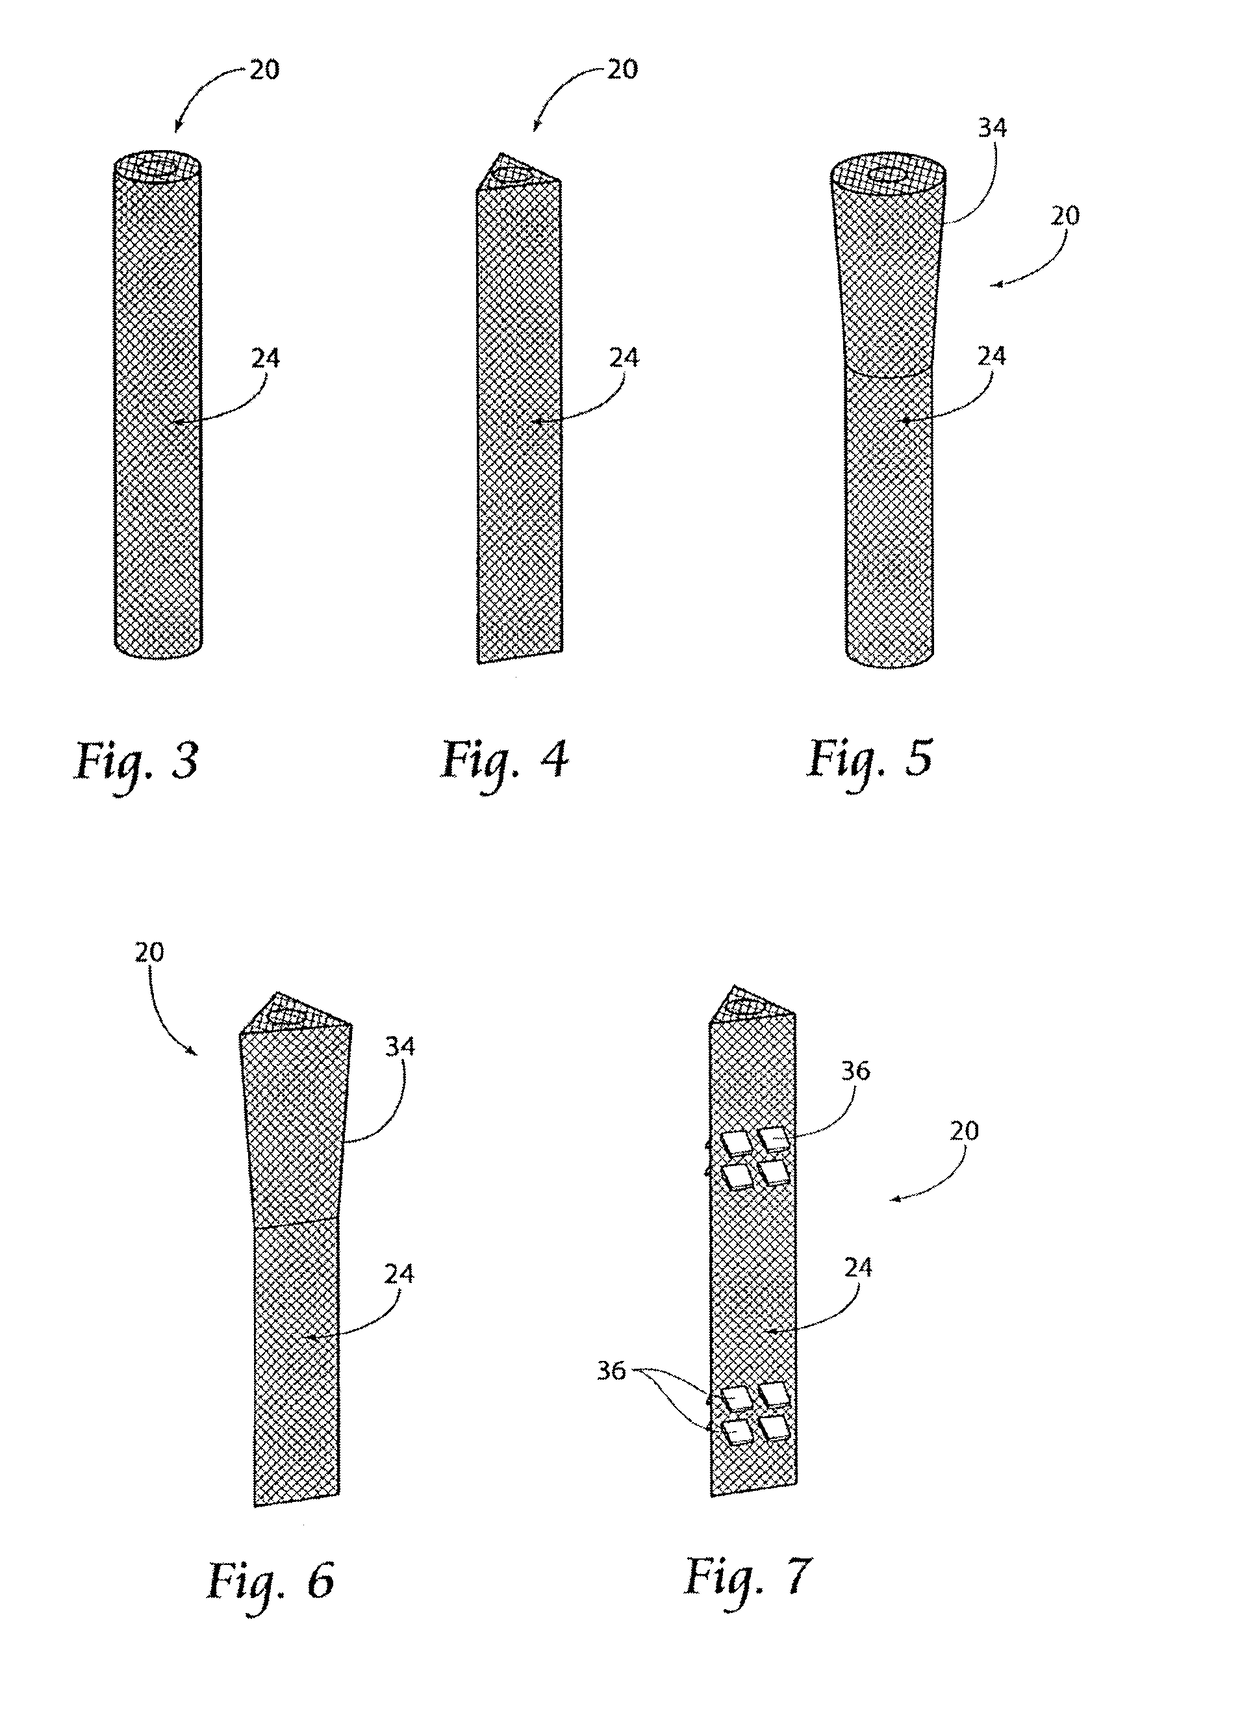 Apparatus, systems, and methods for the fixation or fusion of bone